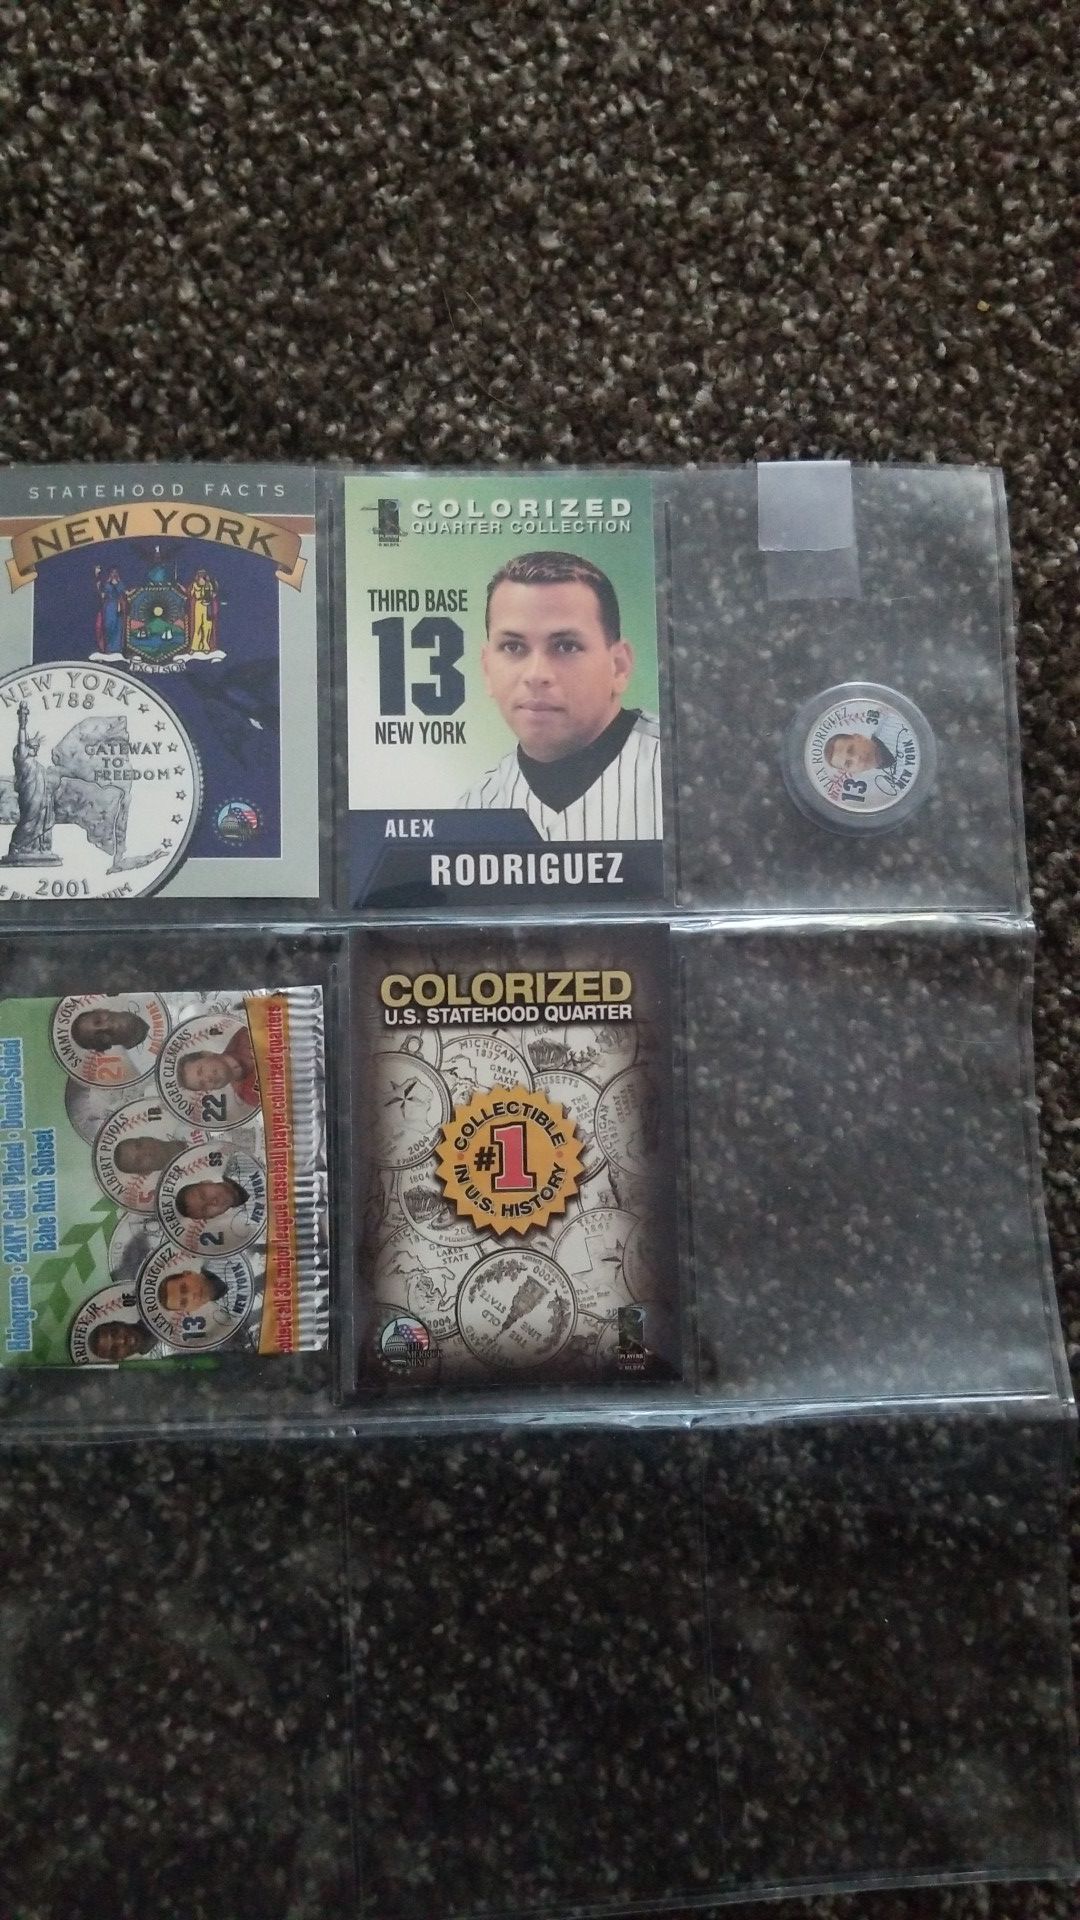 ALEX RODRIGUEZ colorized quarter with baseball card